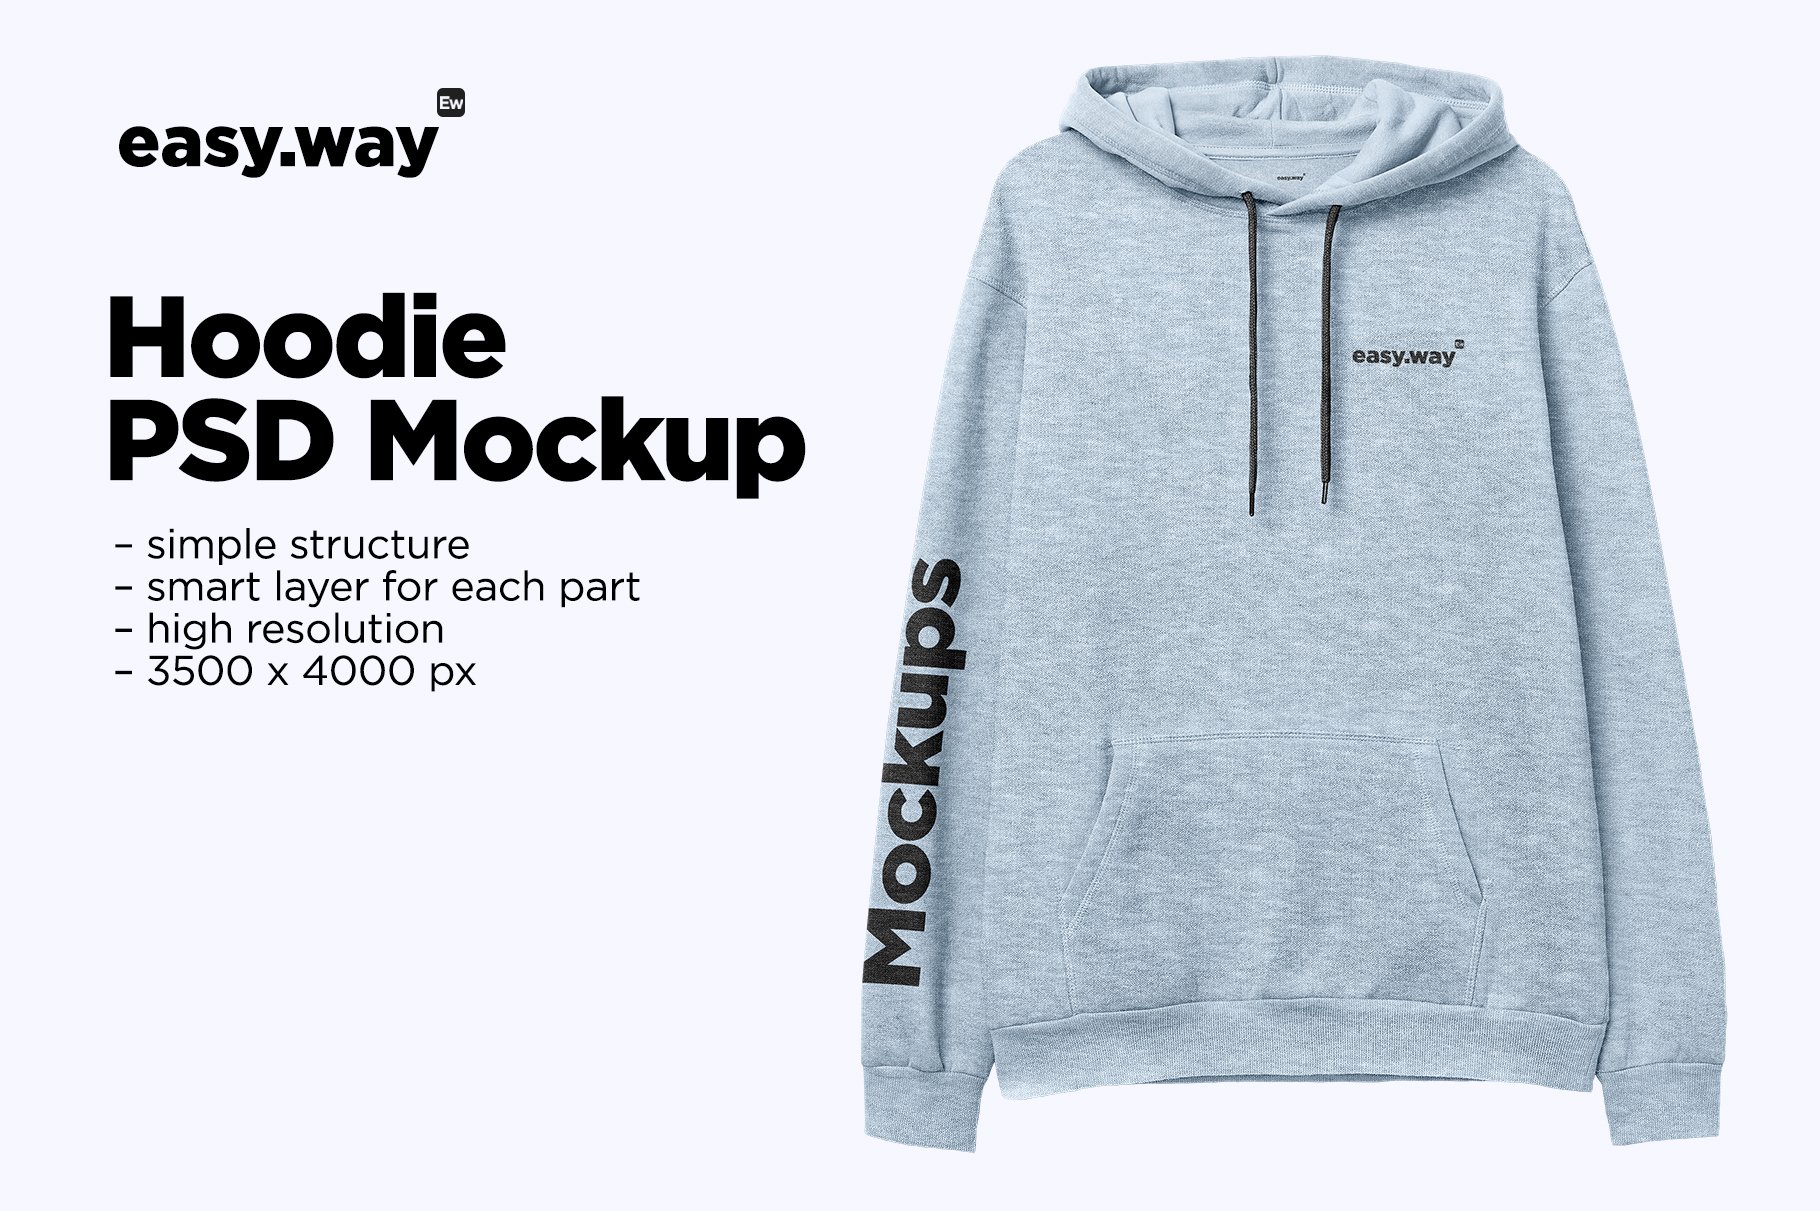 Heather Hoodie Front View PSD Mockup cover image.